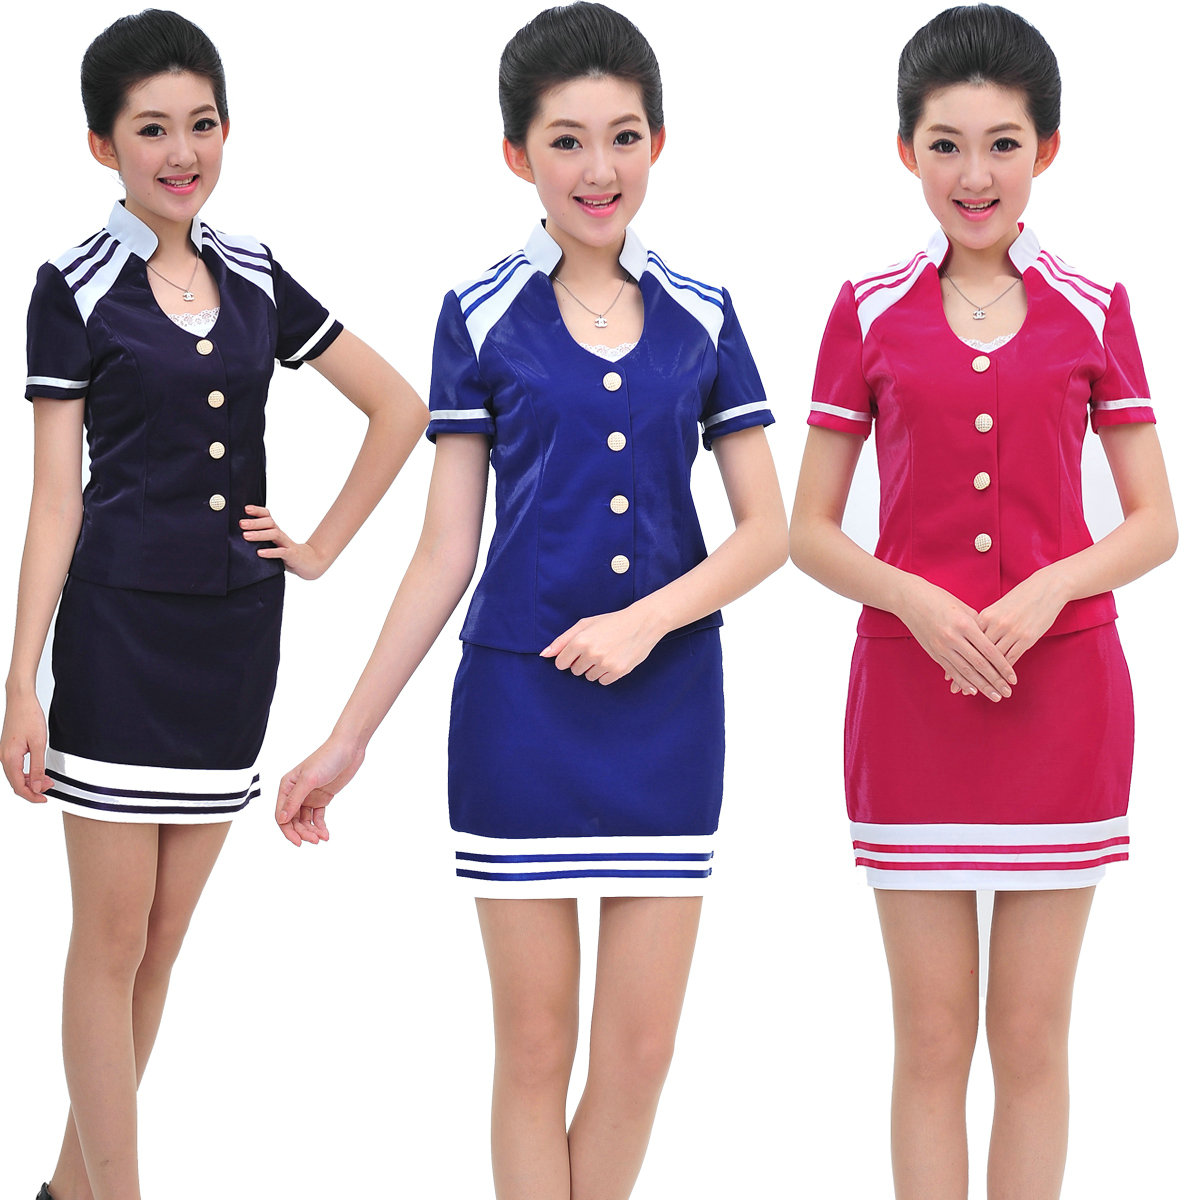 China Airlines Uniform